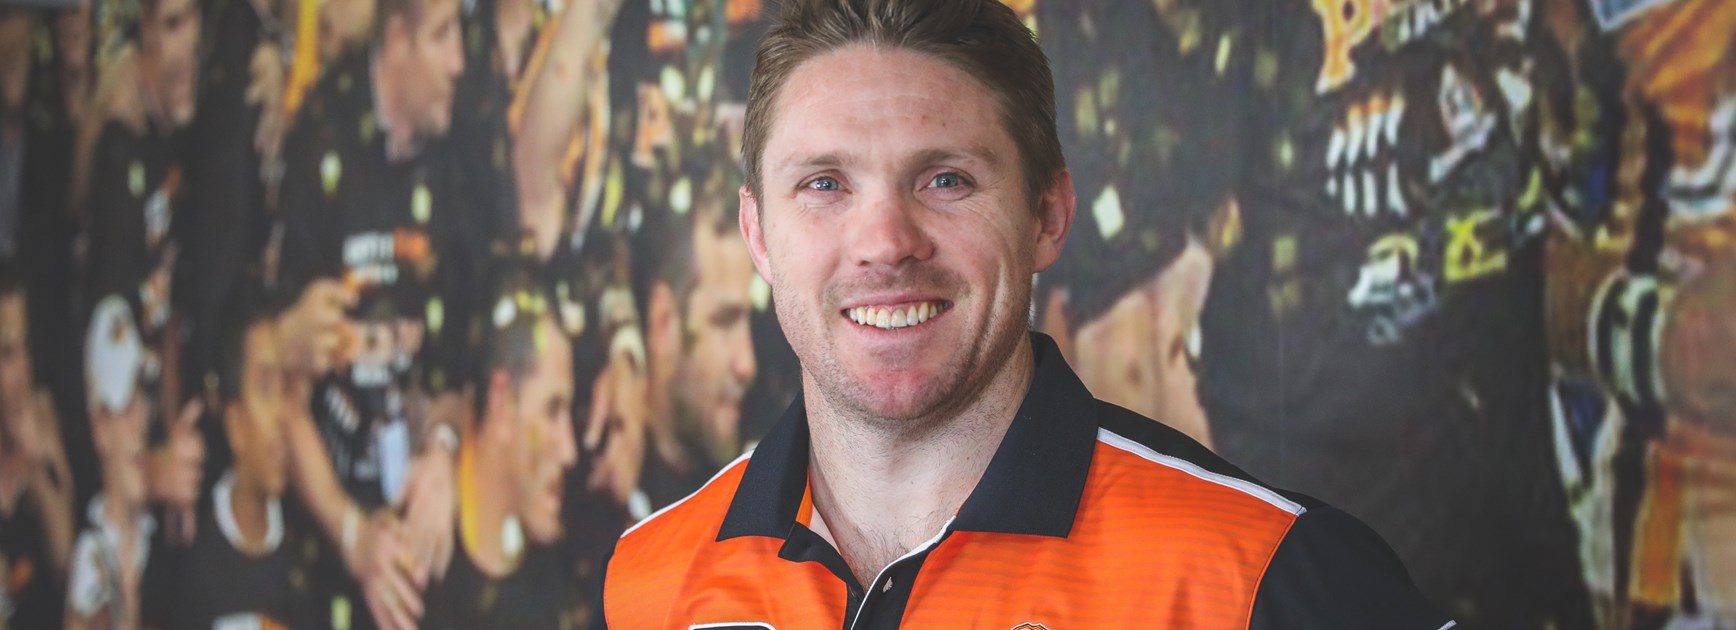 Wests Tigers legends out in force in 2021 staff